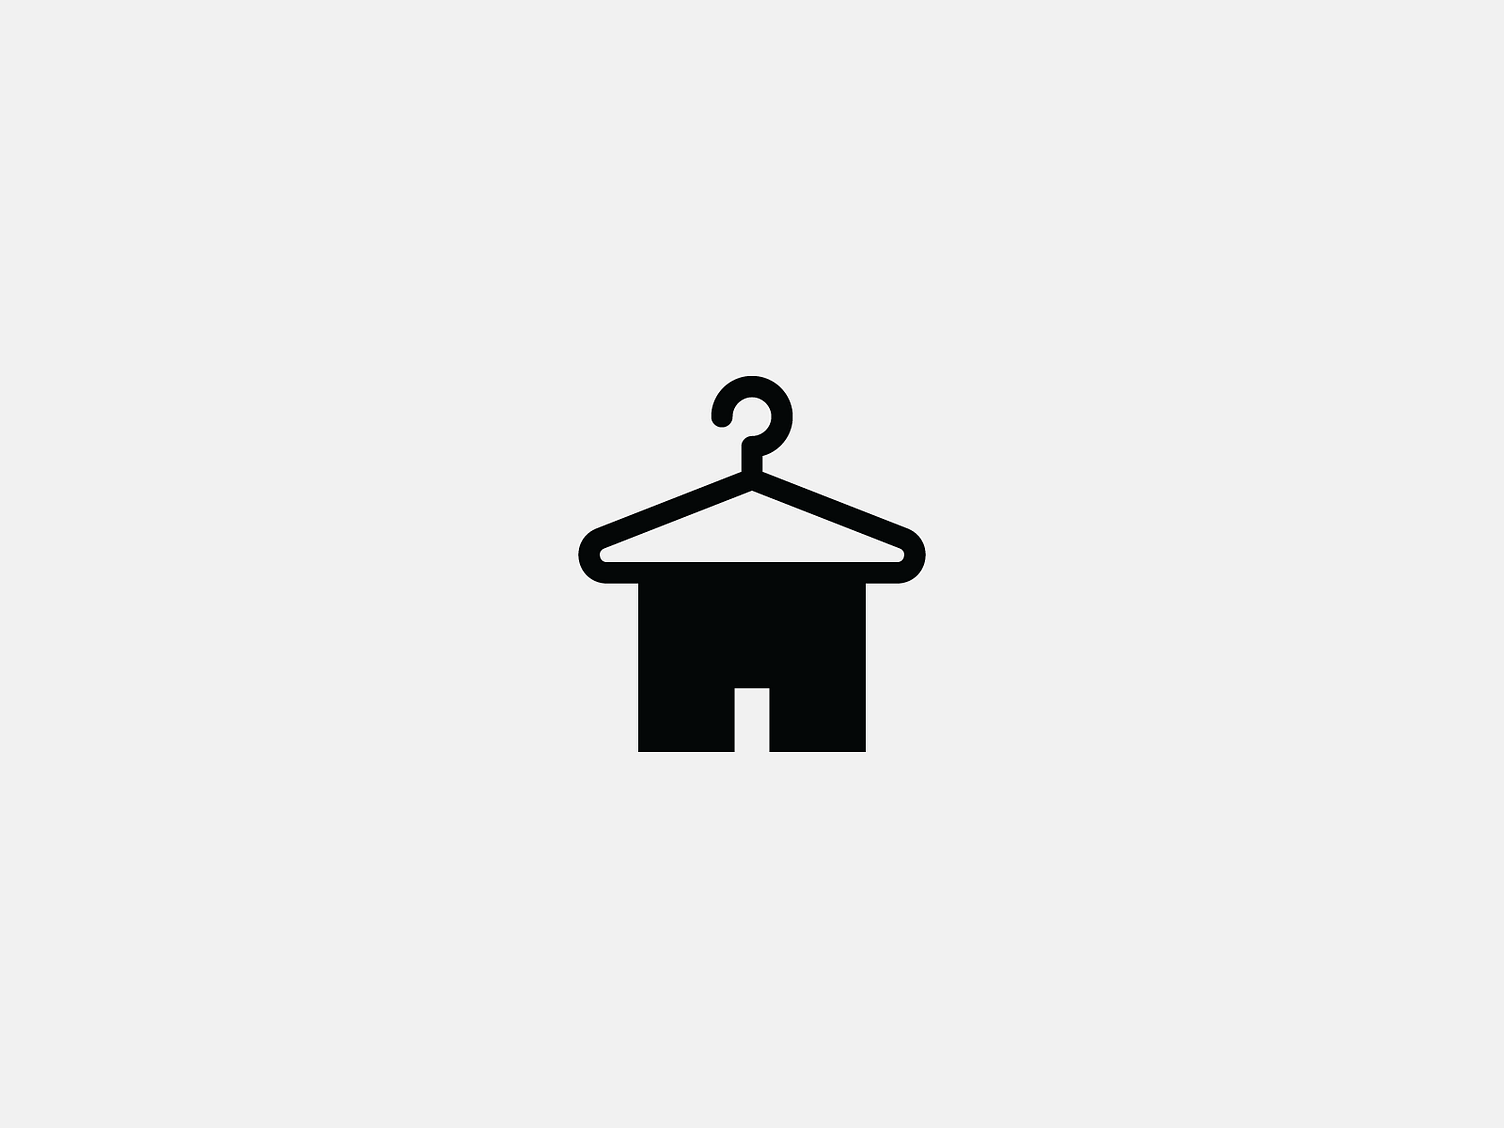 clean house by graphitepoint on Dribbble